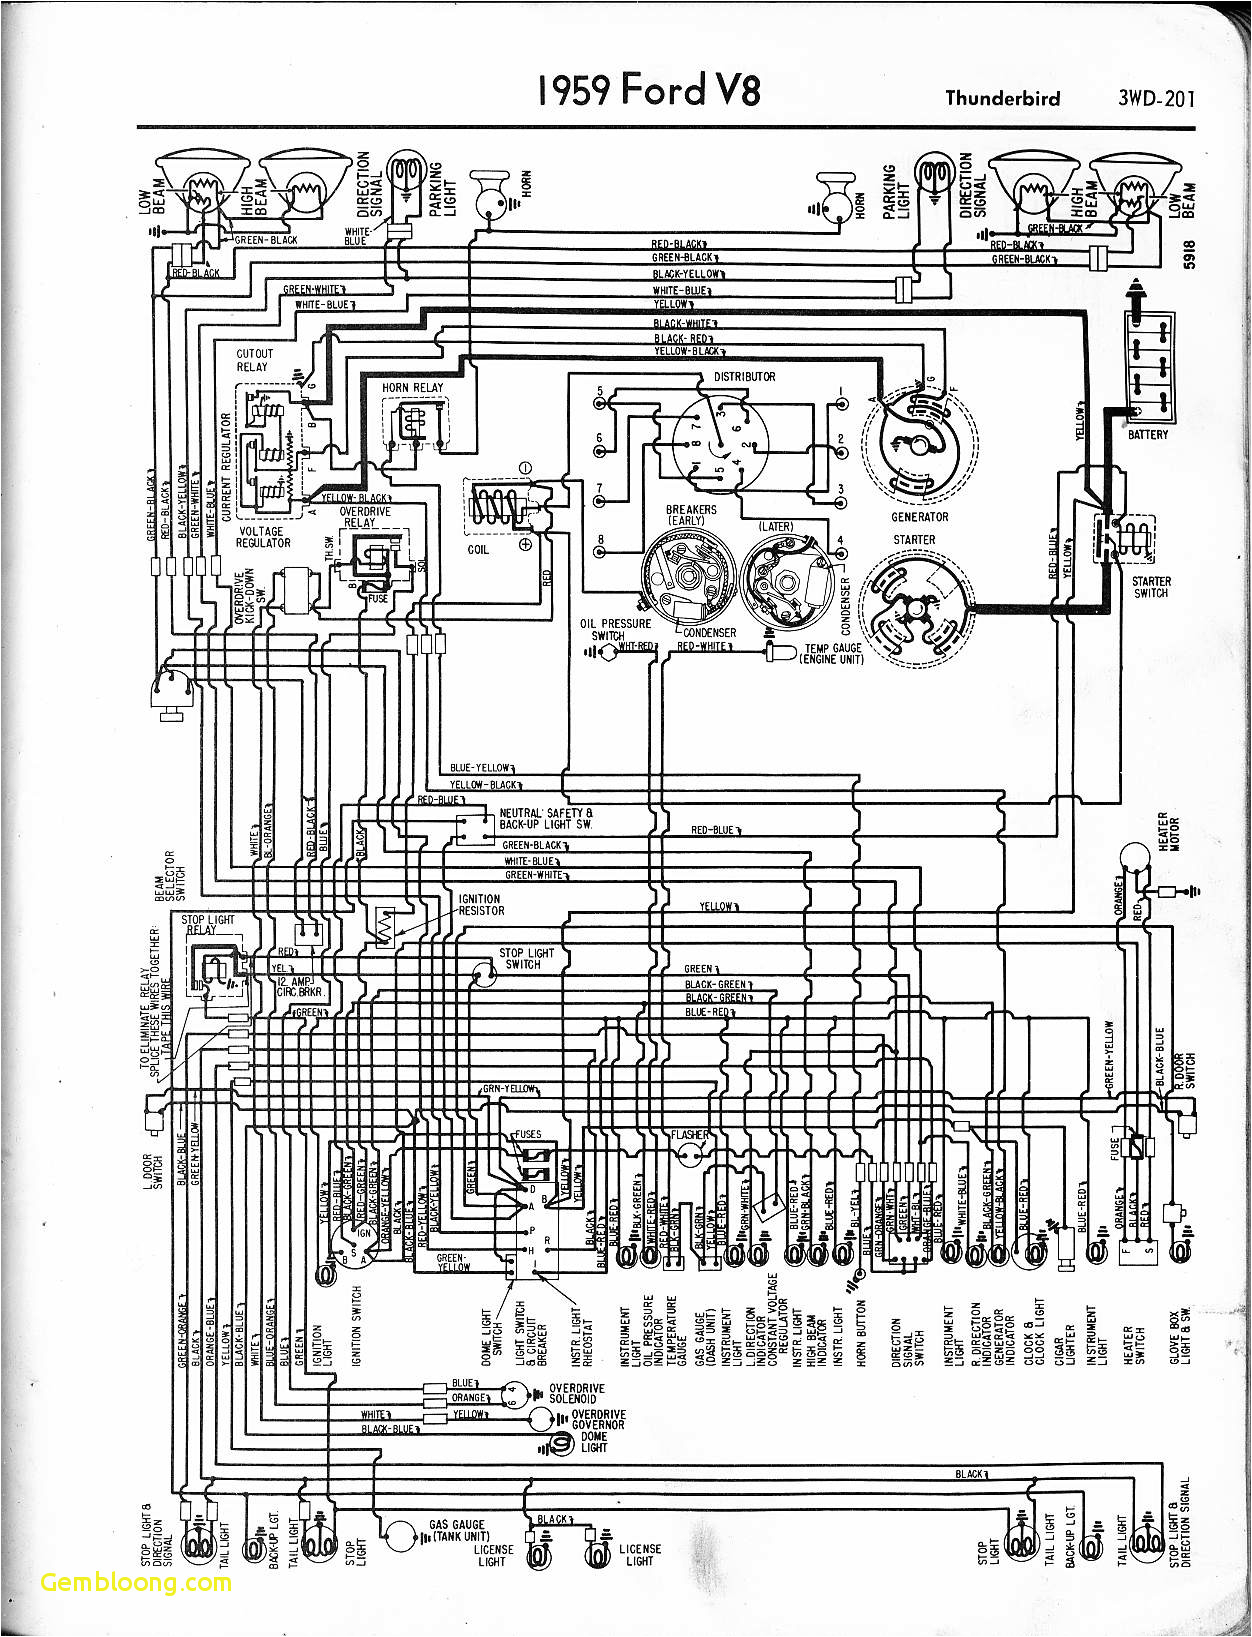 download ford trucks wiring diagrams ford f150 wiring diagrams best volvo s40 2 0d engine diagram